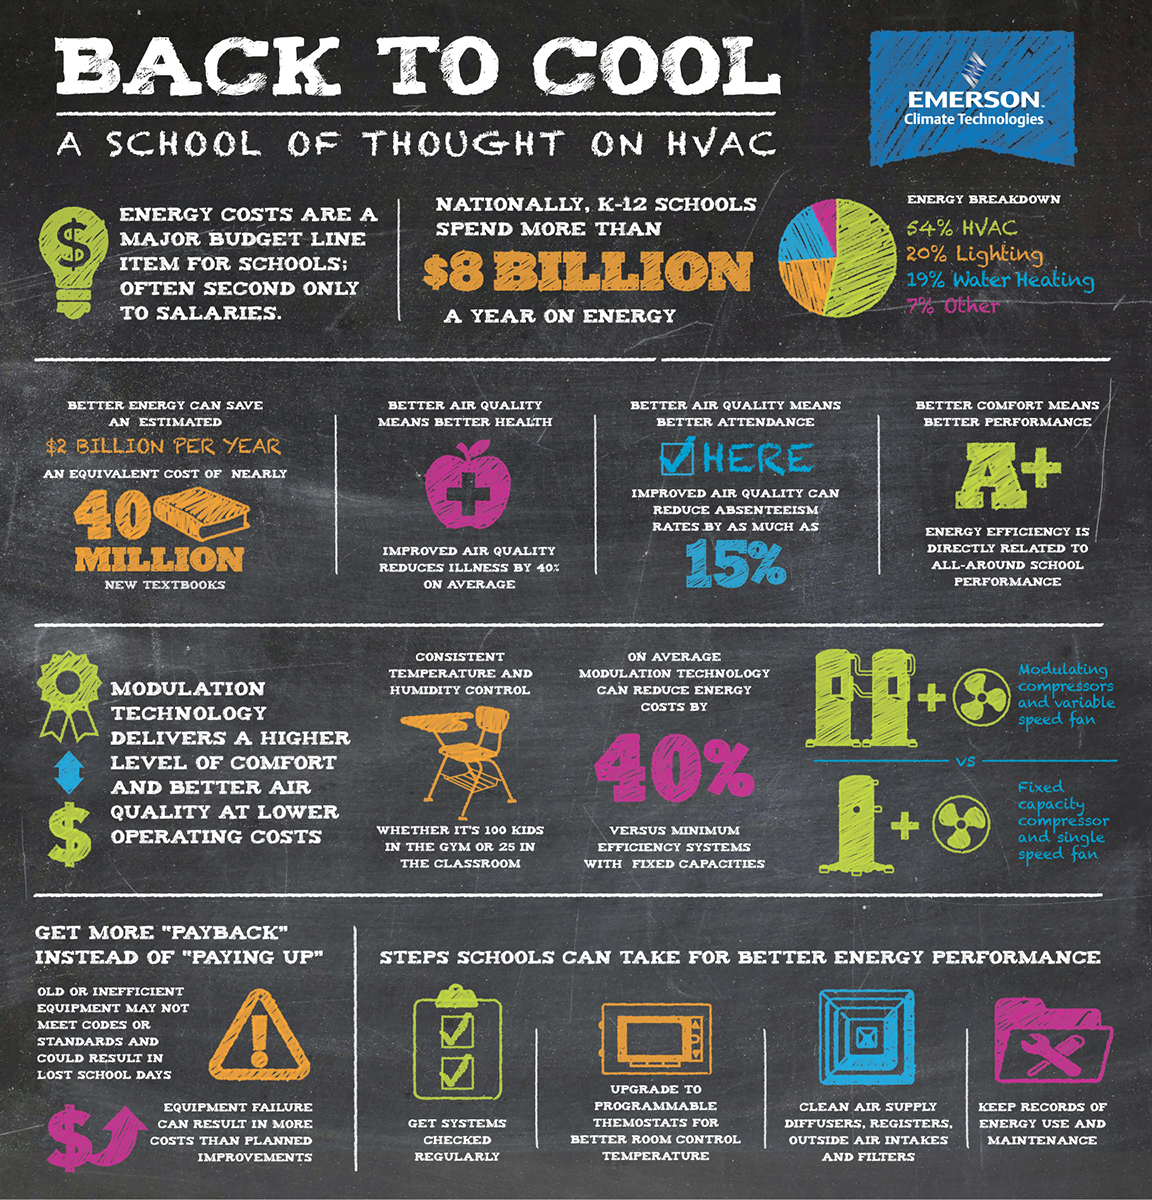 Back to Cool infographic investigates K-12 HVAC usage and energy costs in schools